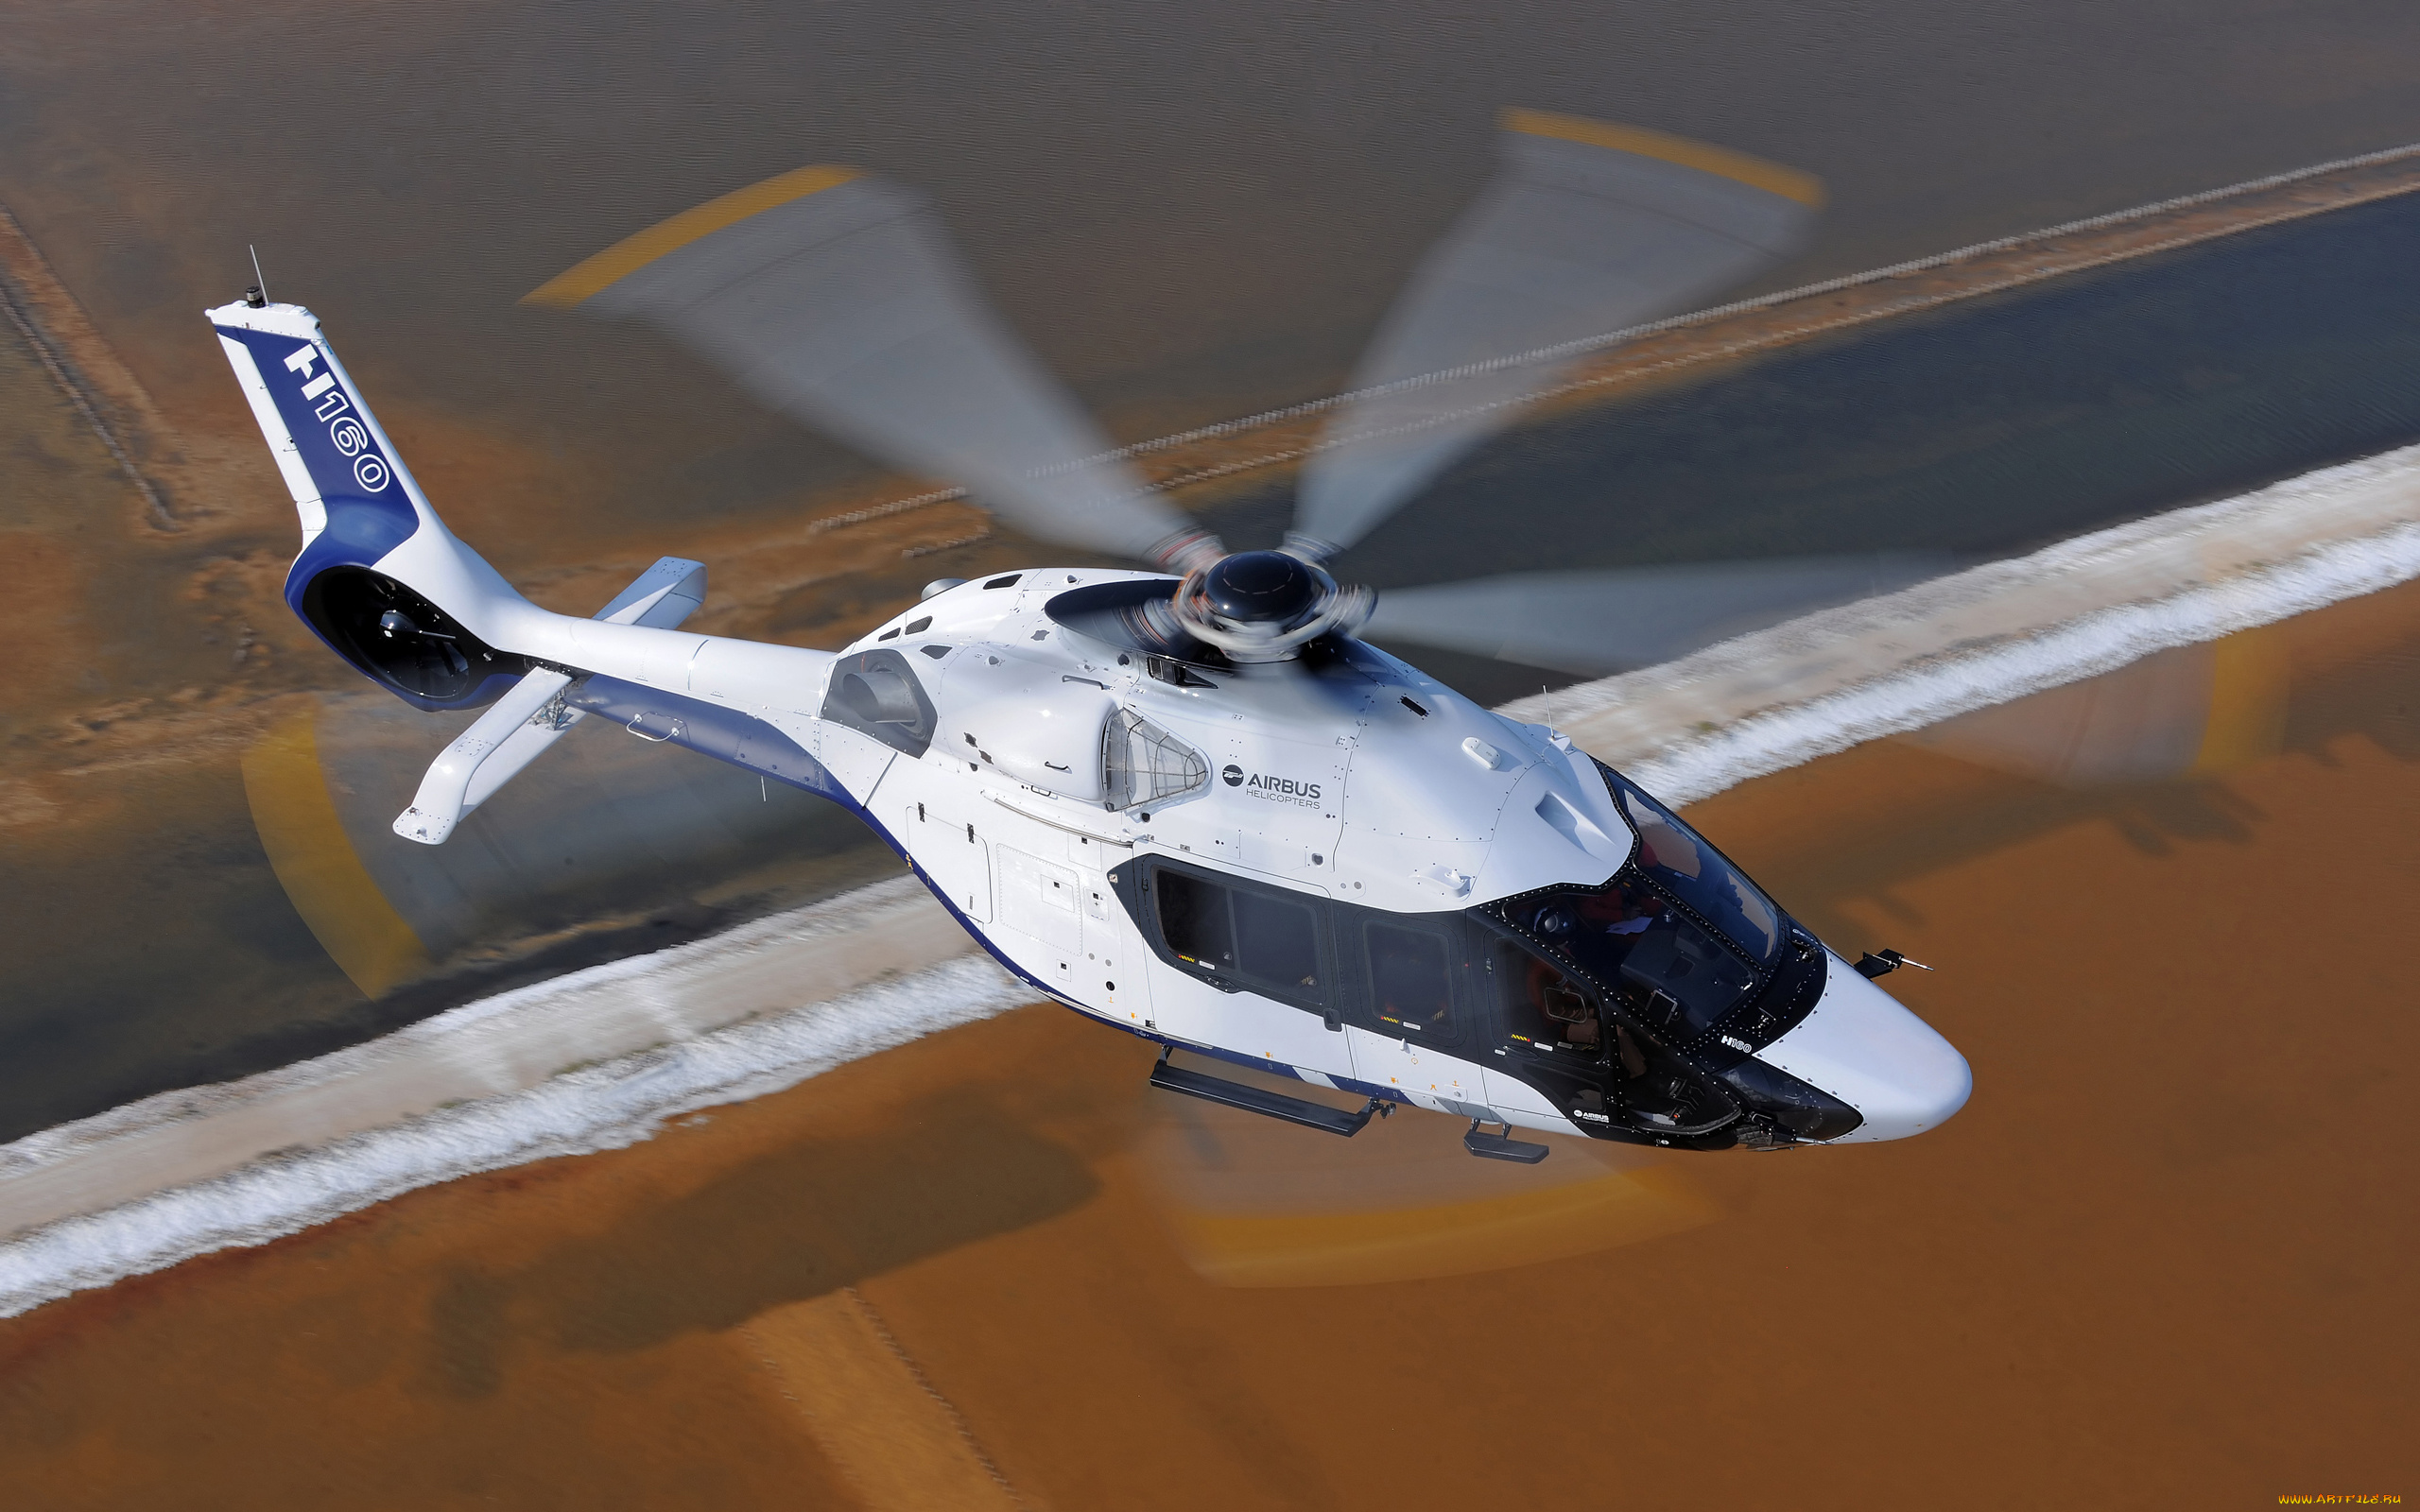 airbus, helicopters, h160, авиация, вертолёты, небо, вертолет, airbus, helicopters, h160